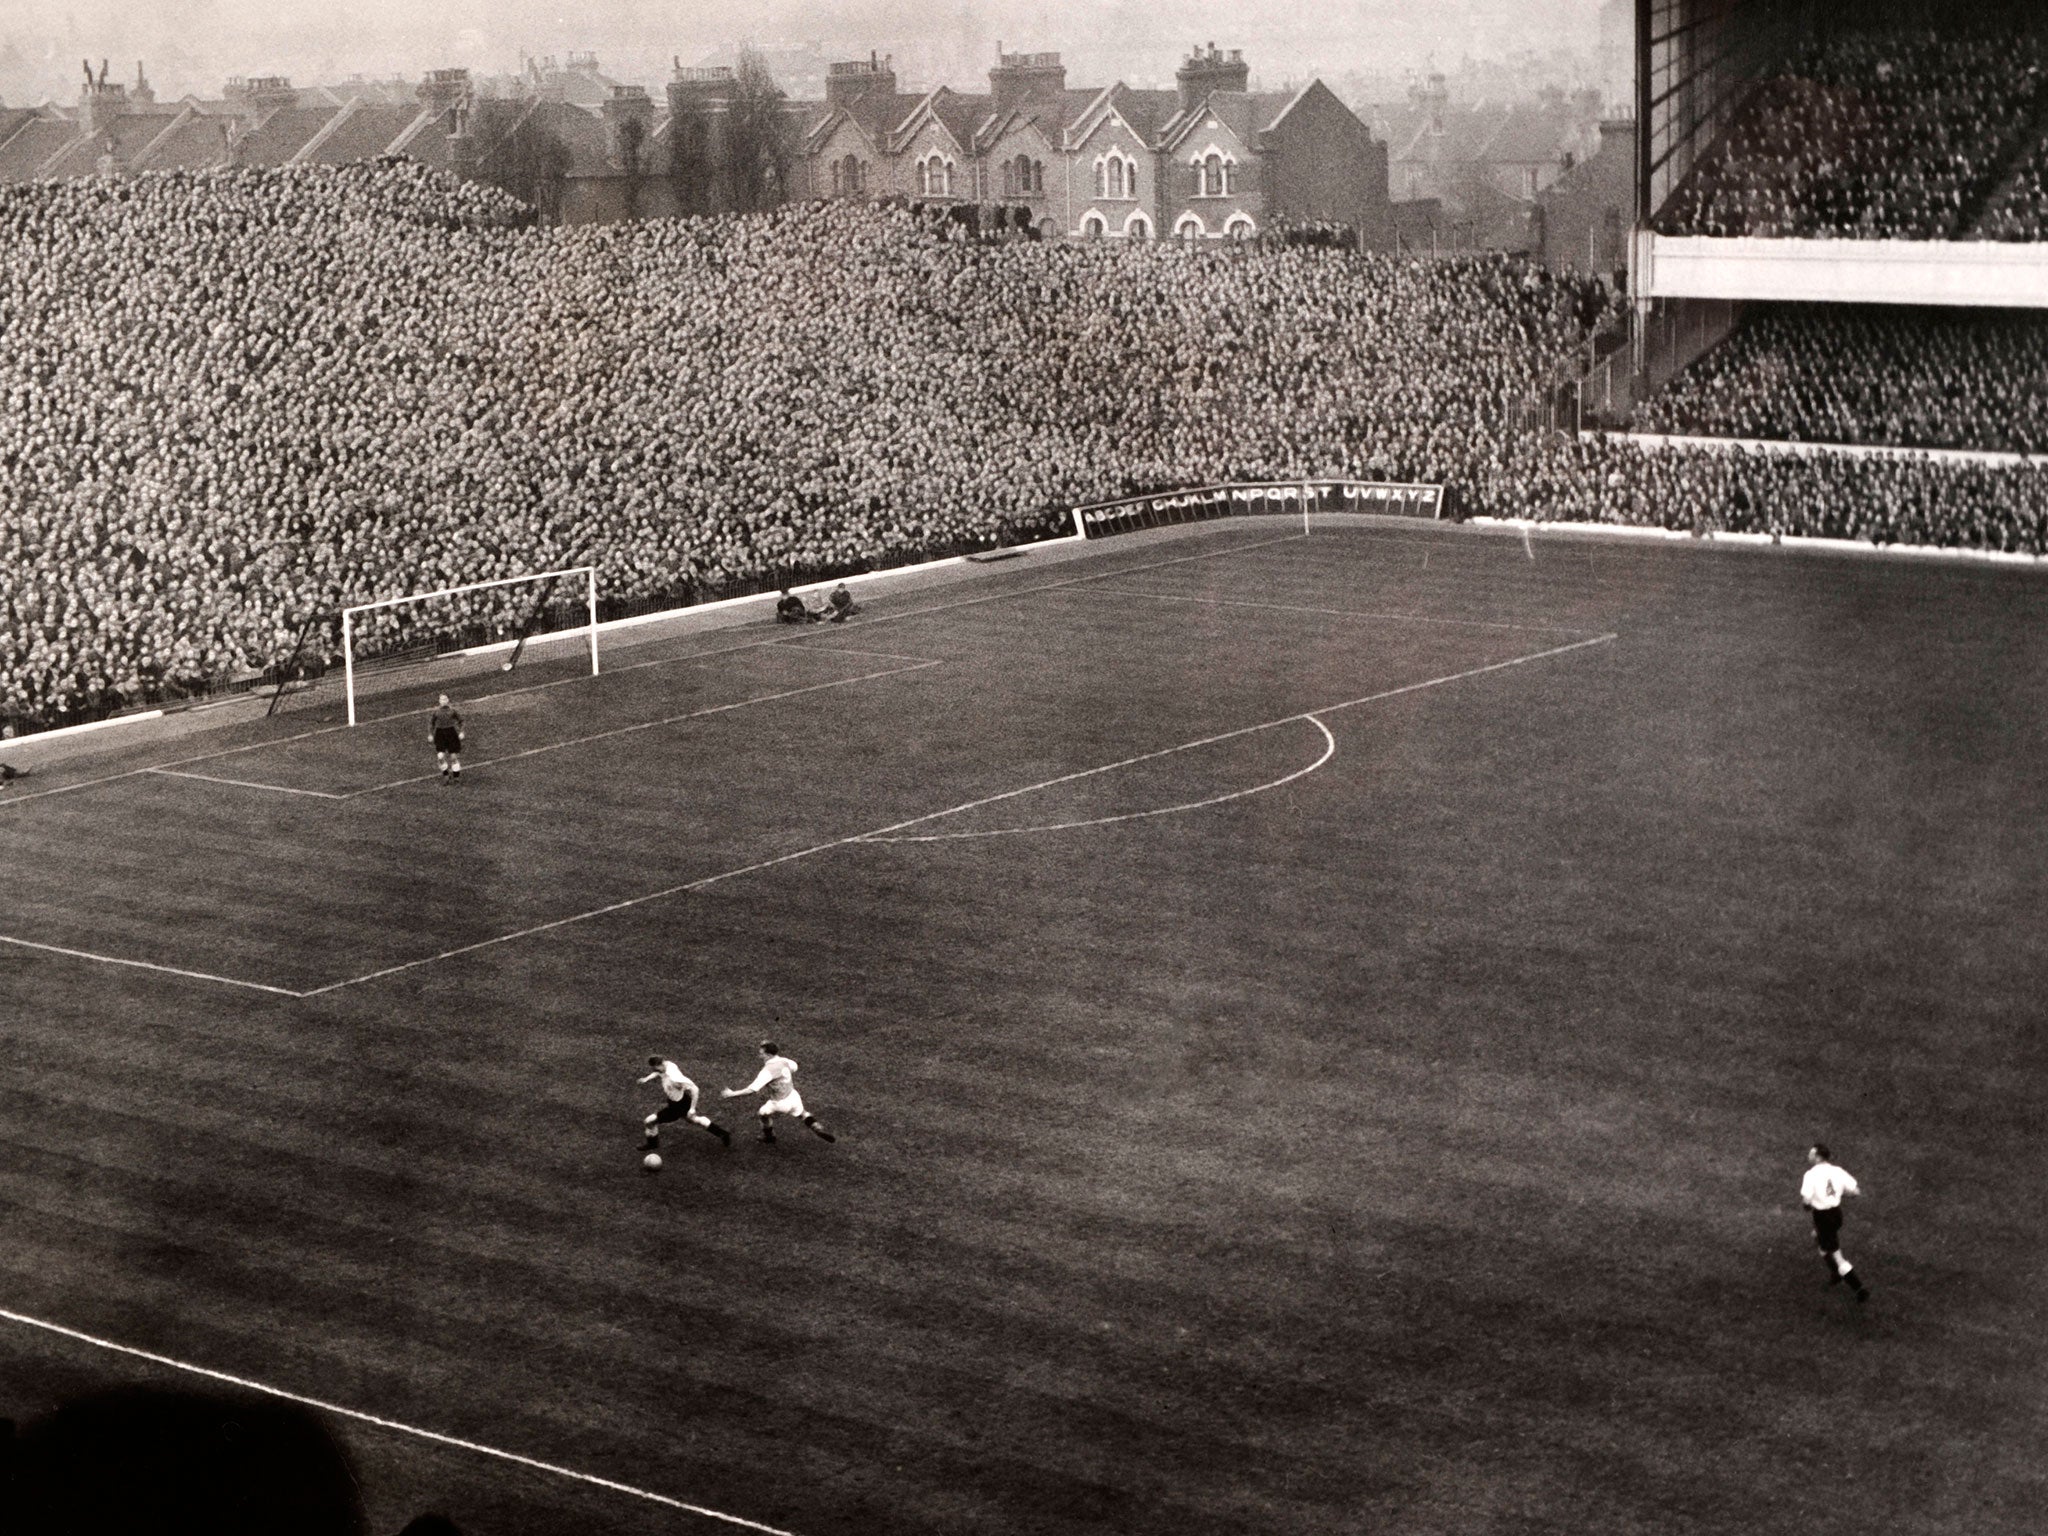 A match at Arsenal's former ground Highbury back in the 1930s. Originally Arsenal were not allowed to play on Christmas Day or Good Friday at the ground as it was owned by the Church